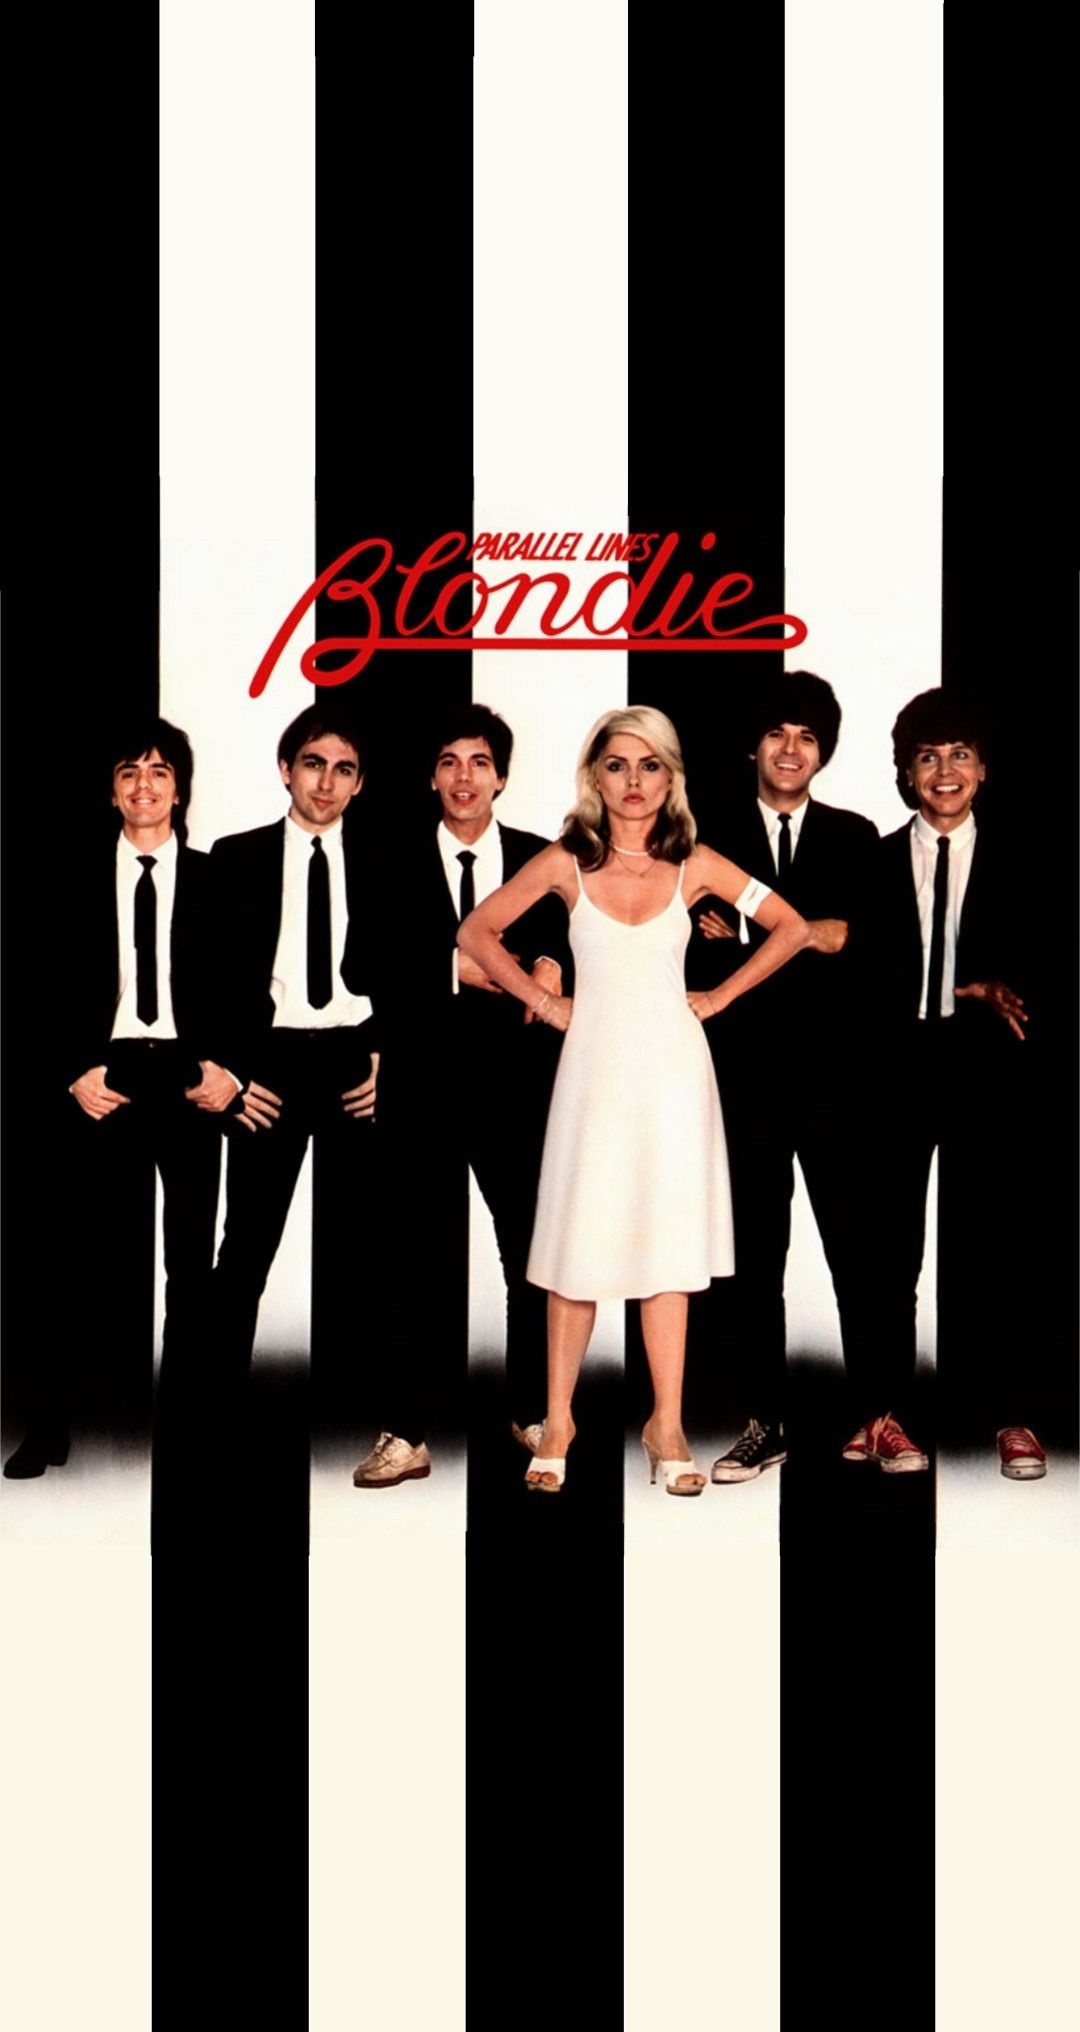 Blondie band, Parallel Lines album, Vintage music posters, Band photoshoot, 1080x2040 HD Phone